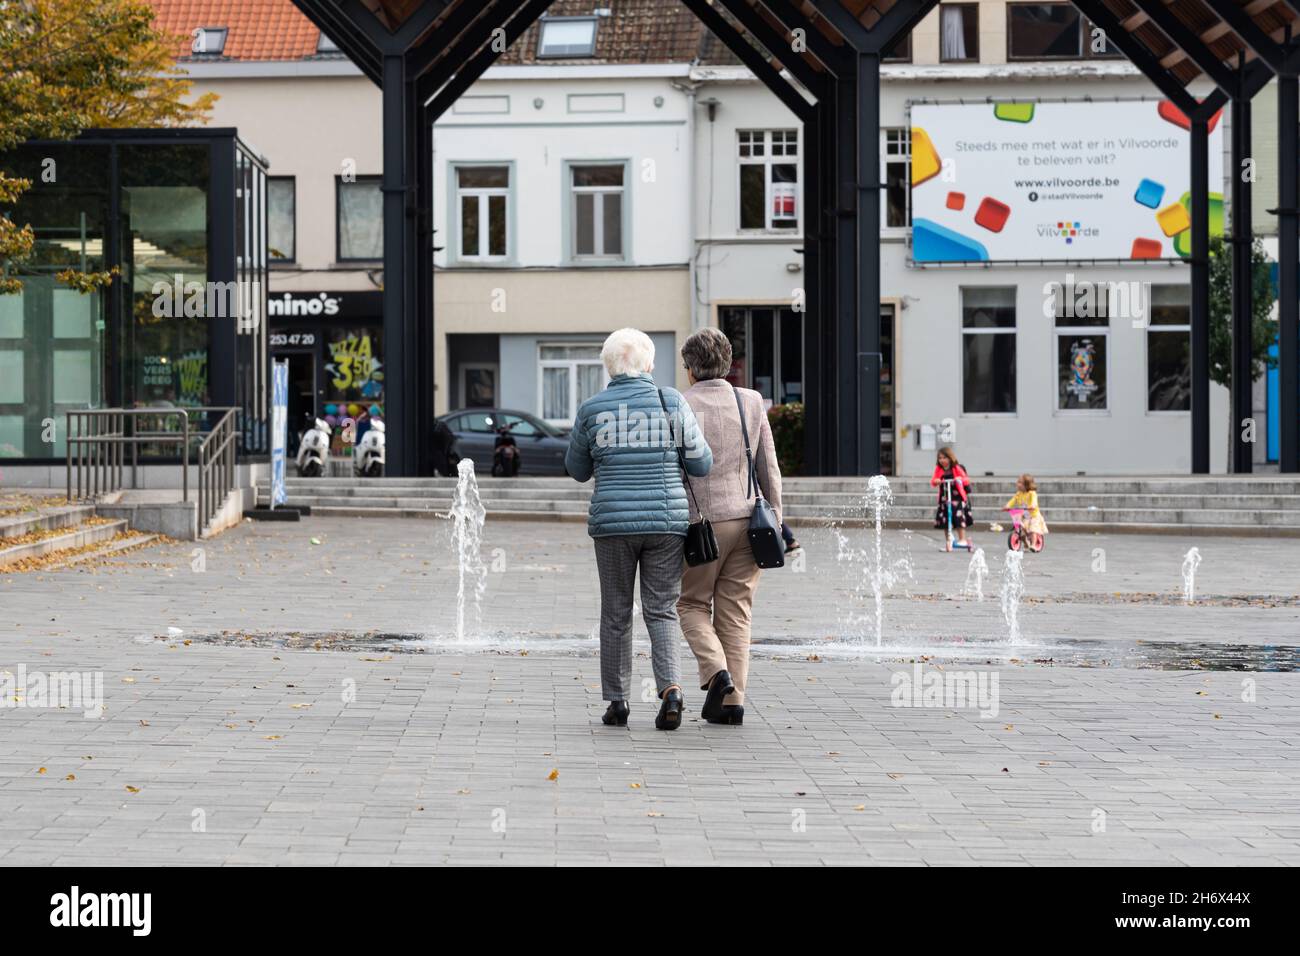 Vilvoorde, Flemish Region - Belgium - 10 17 2021: Two senior woman walking hand in hand at the old market square Stock Photo